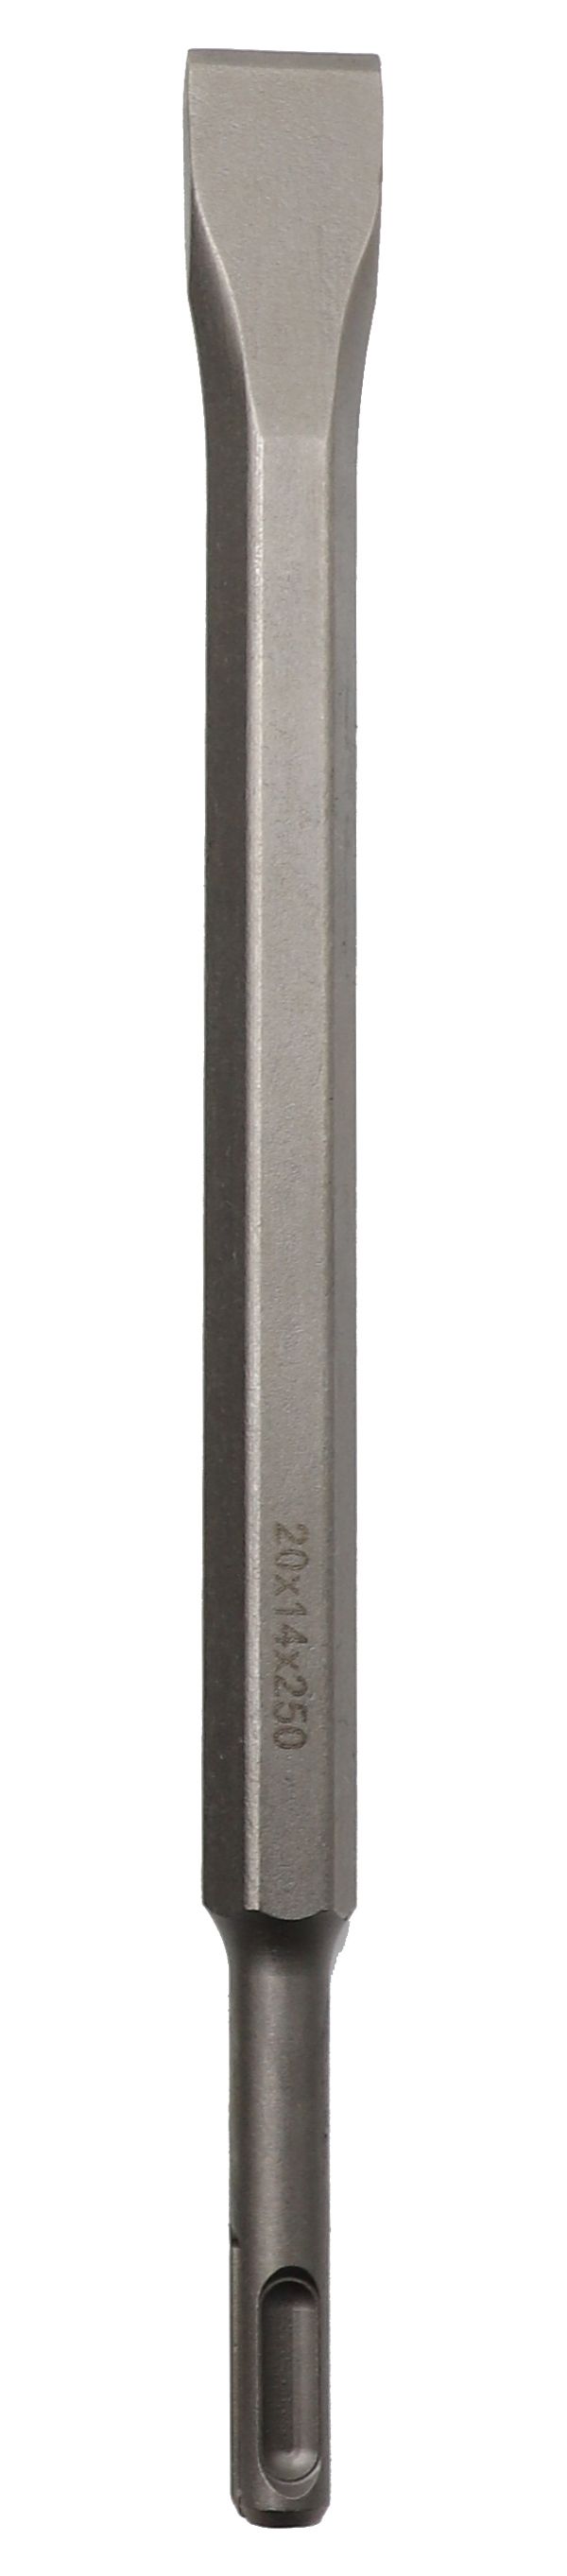 Wickes SDS+ Flat Hammer Chisel - 250mm